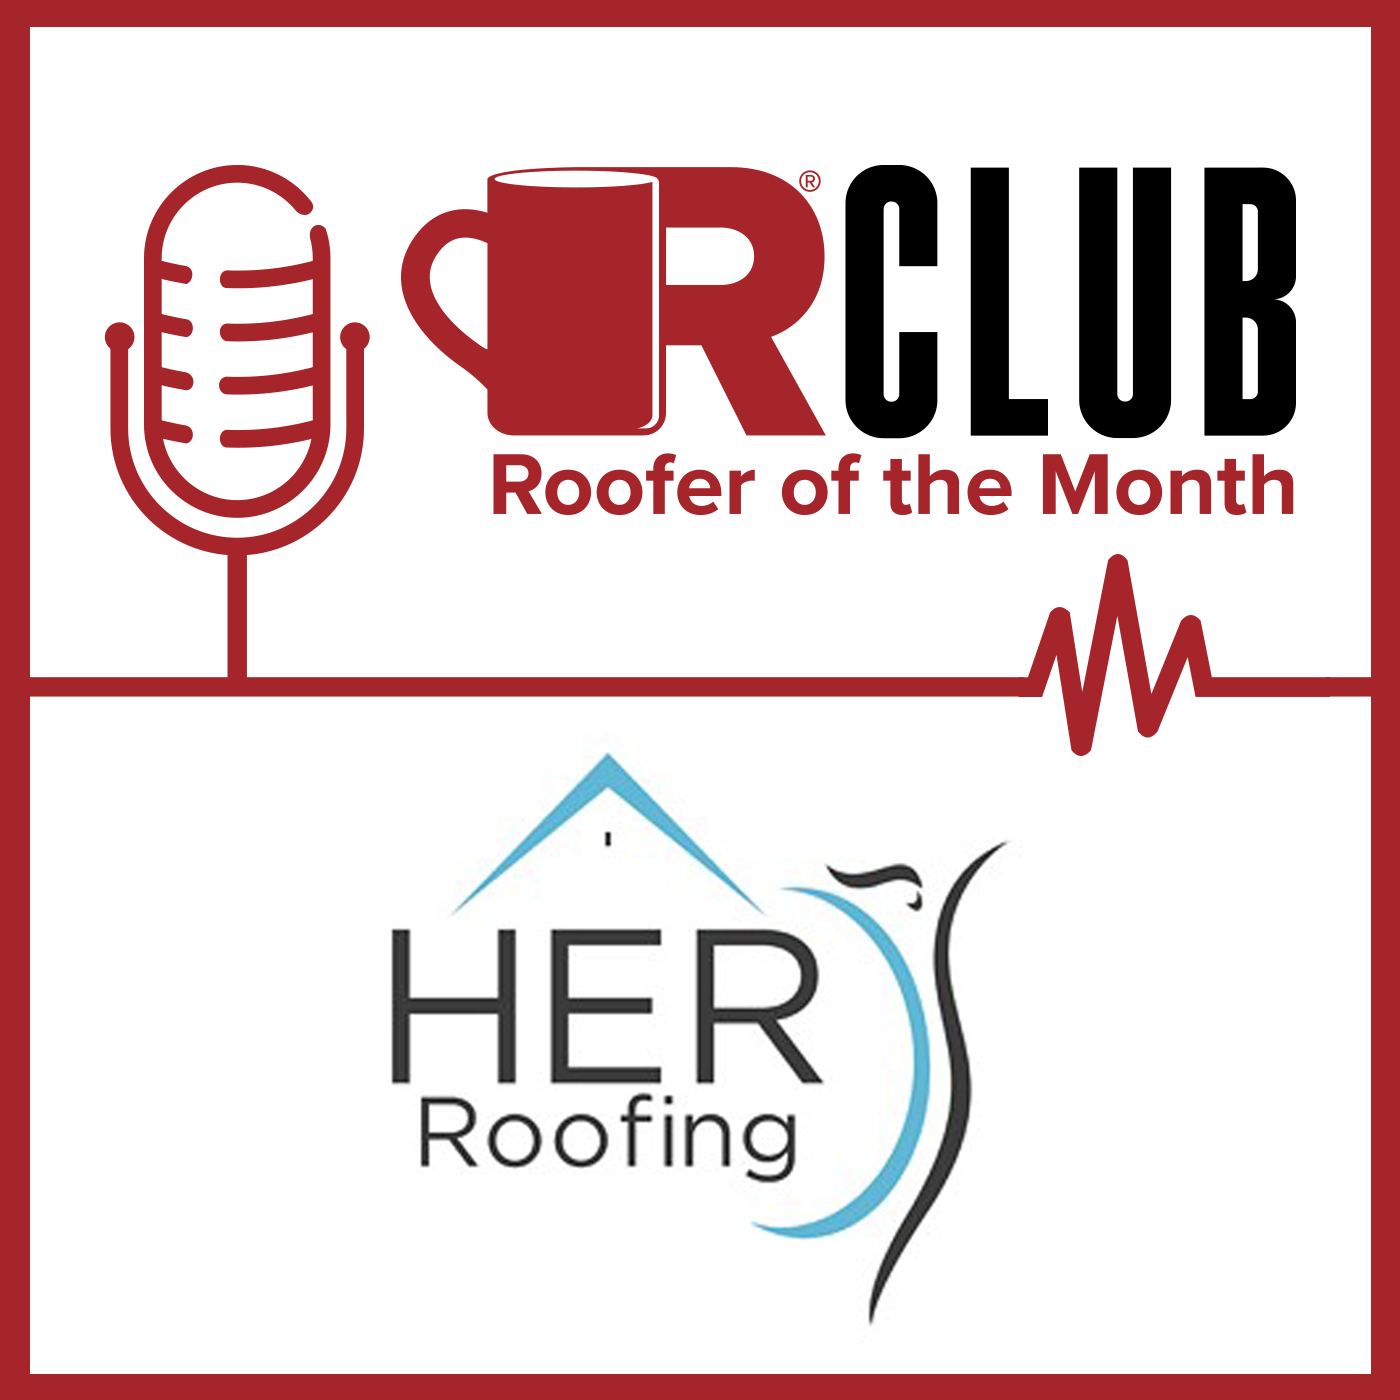 HER Roofing - ROTM - POD